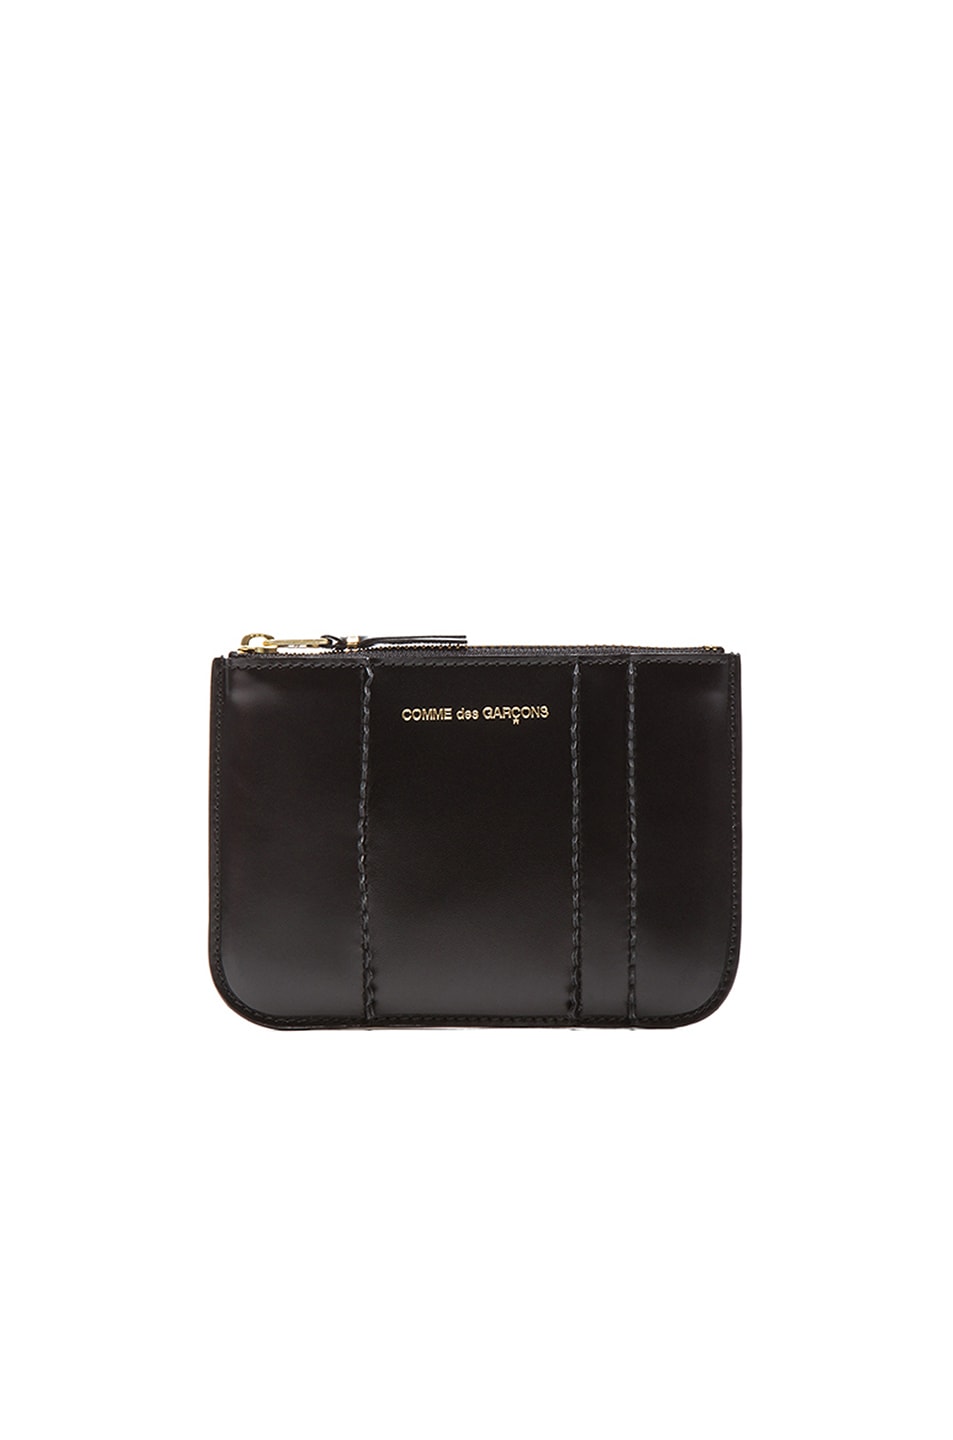 Comme Des Garcons Raised Spike Small Pouch in Black | FWRD